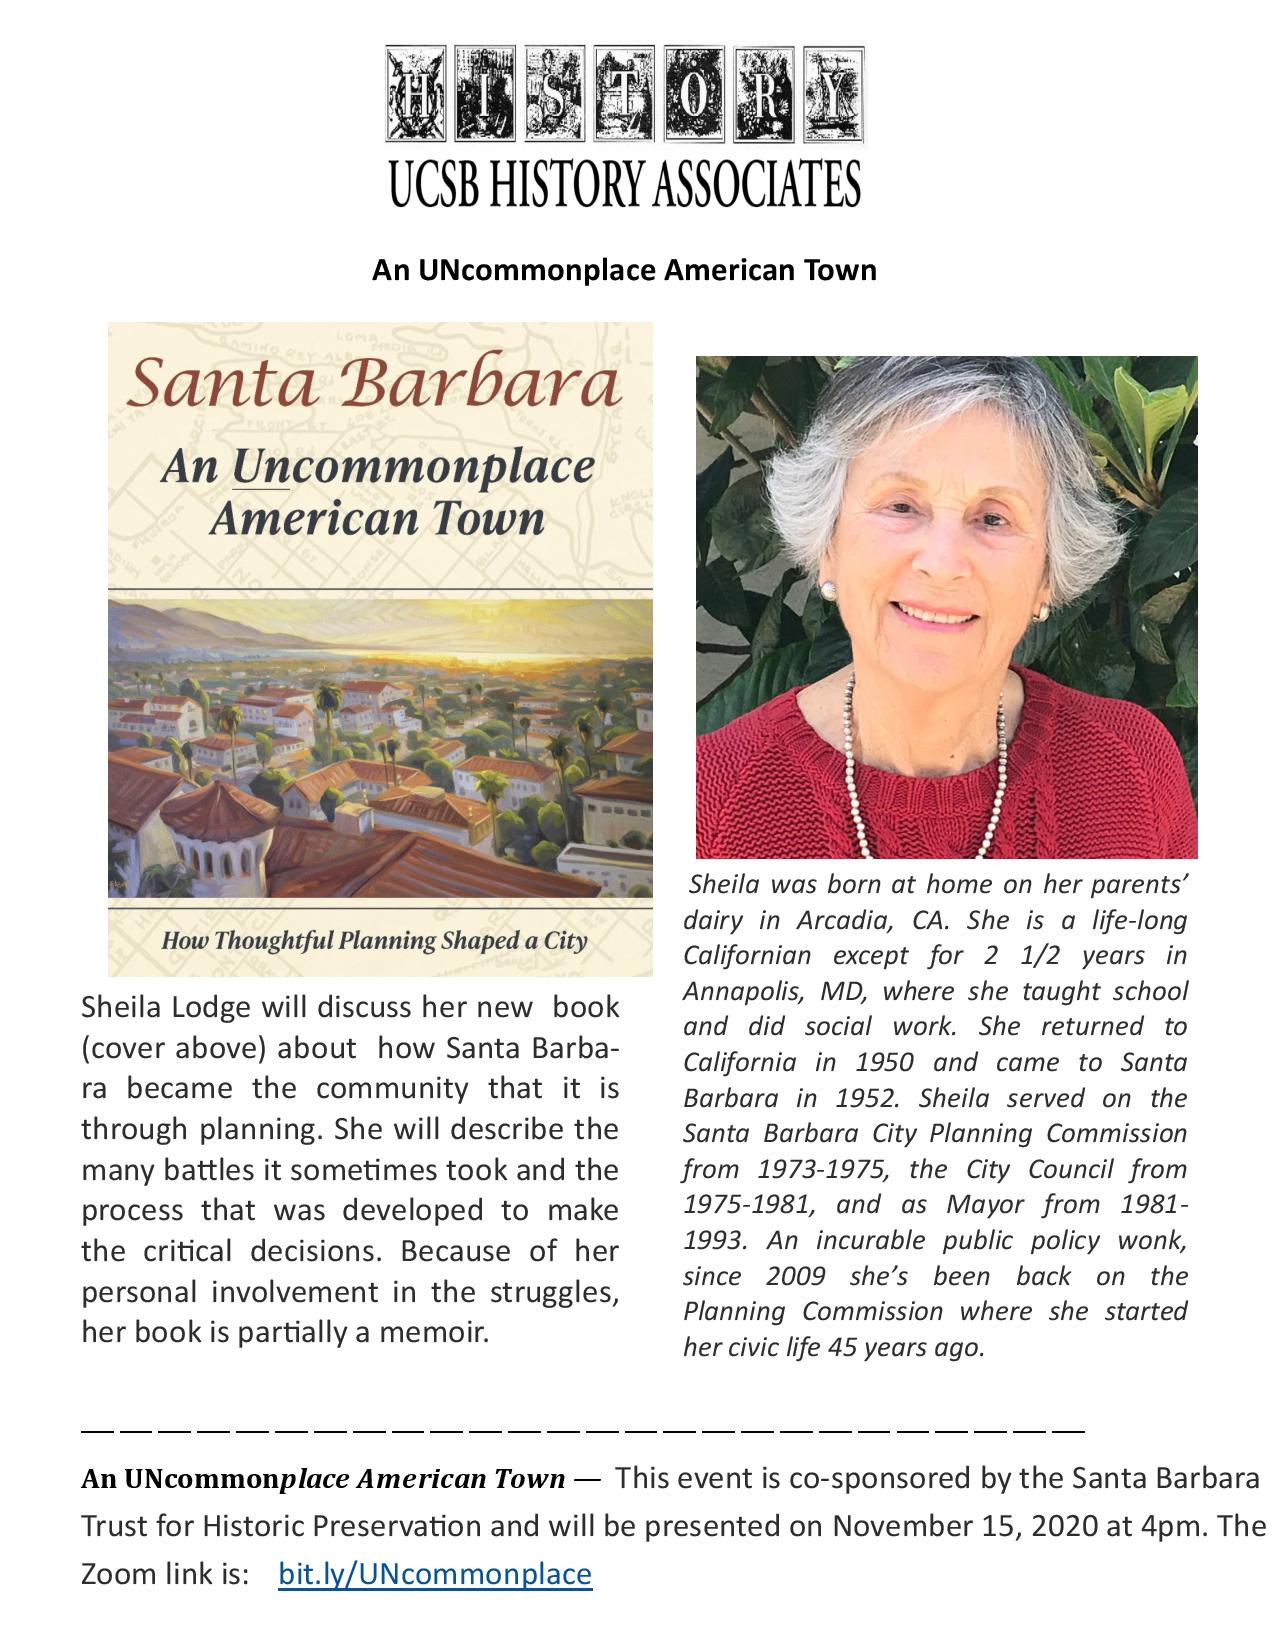 Flyer for Zoom Talk "Santa Barbara: An Uncommonplace American Town" on 11/15/20 at 4PM